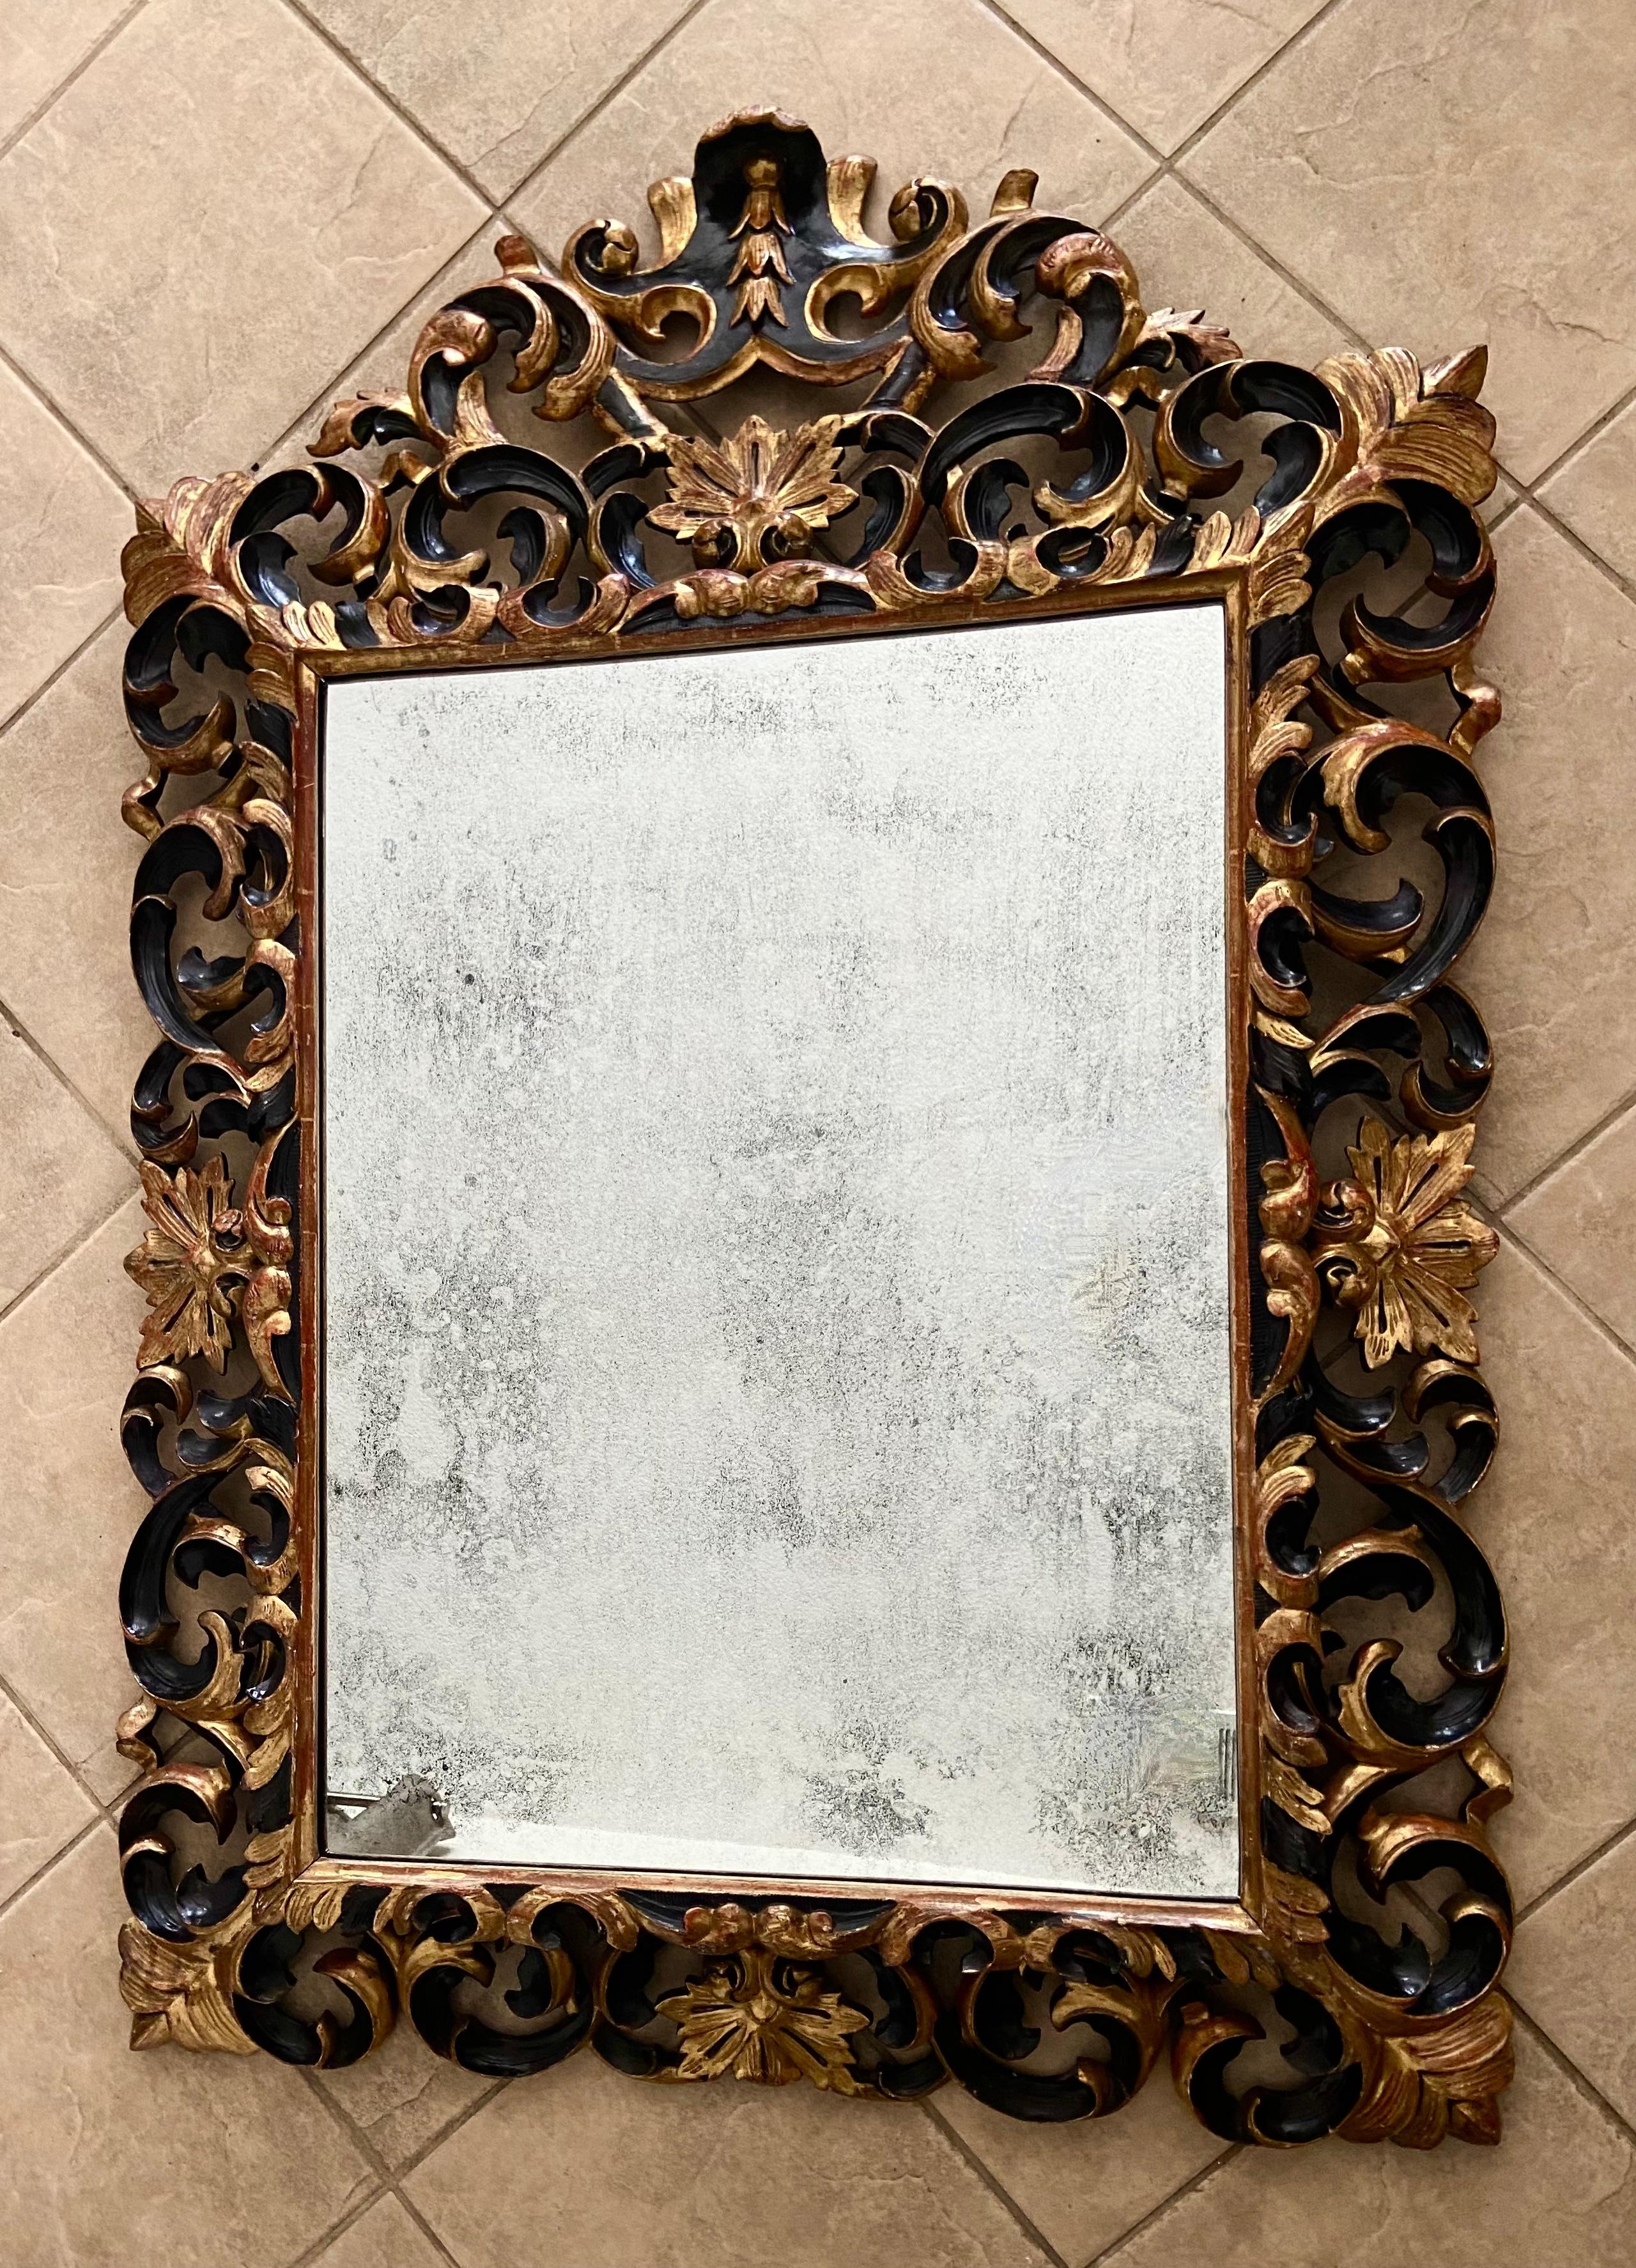 19th Century Italian Rococo Gilt Wood Wall Mirror In Good Condition For Sale In Palm Springs, CA